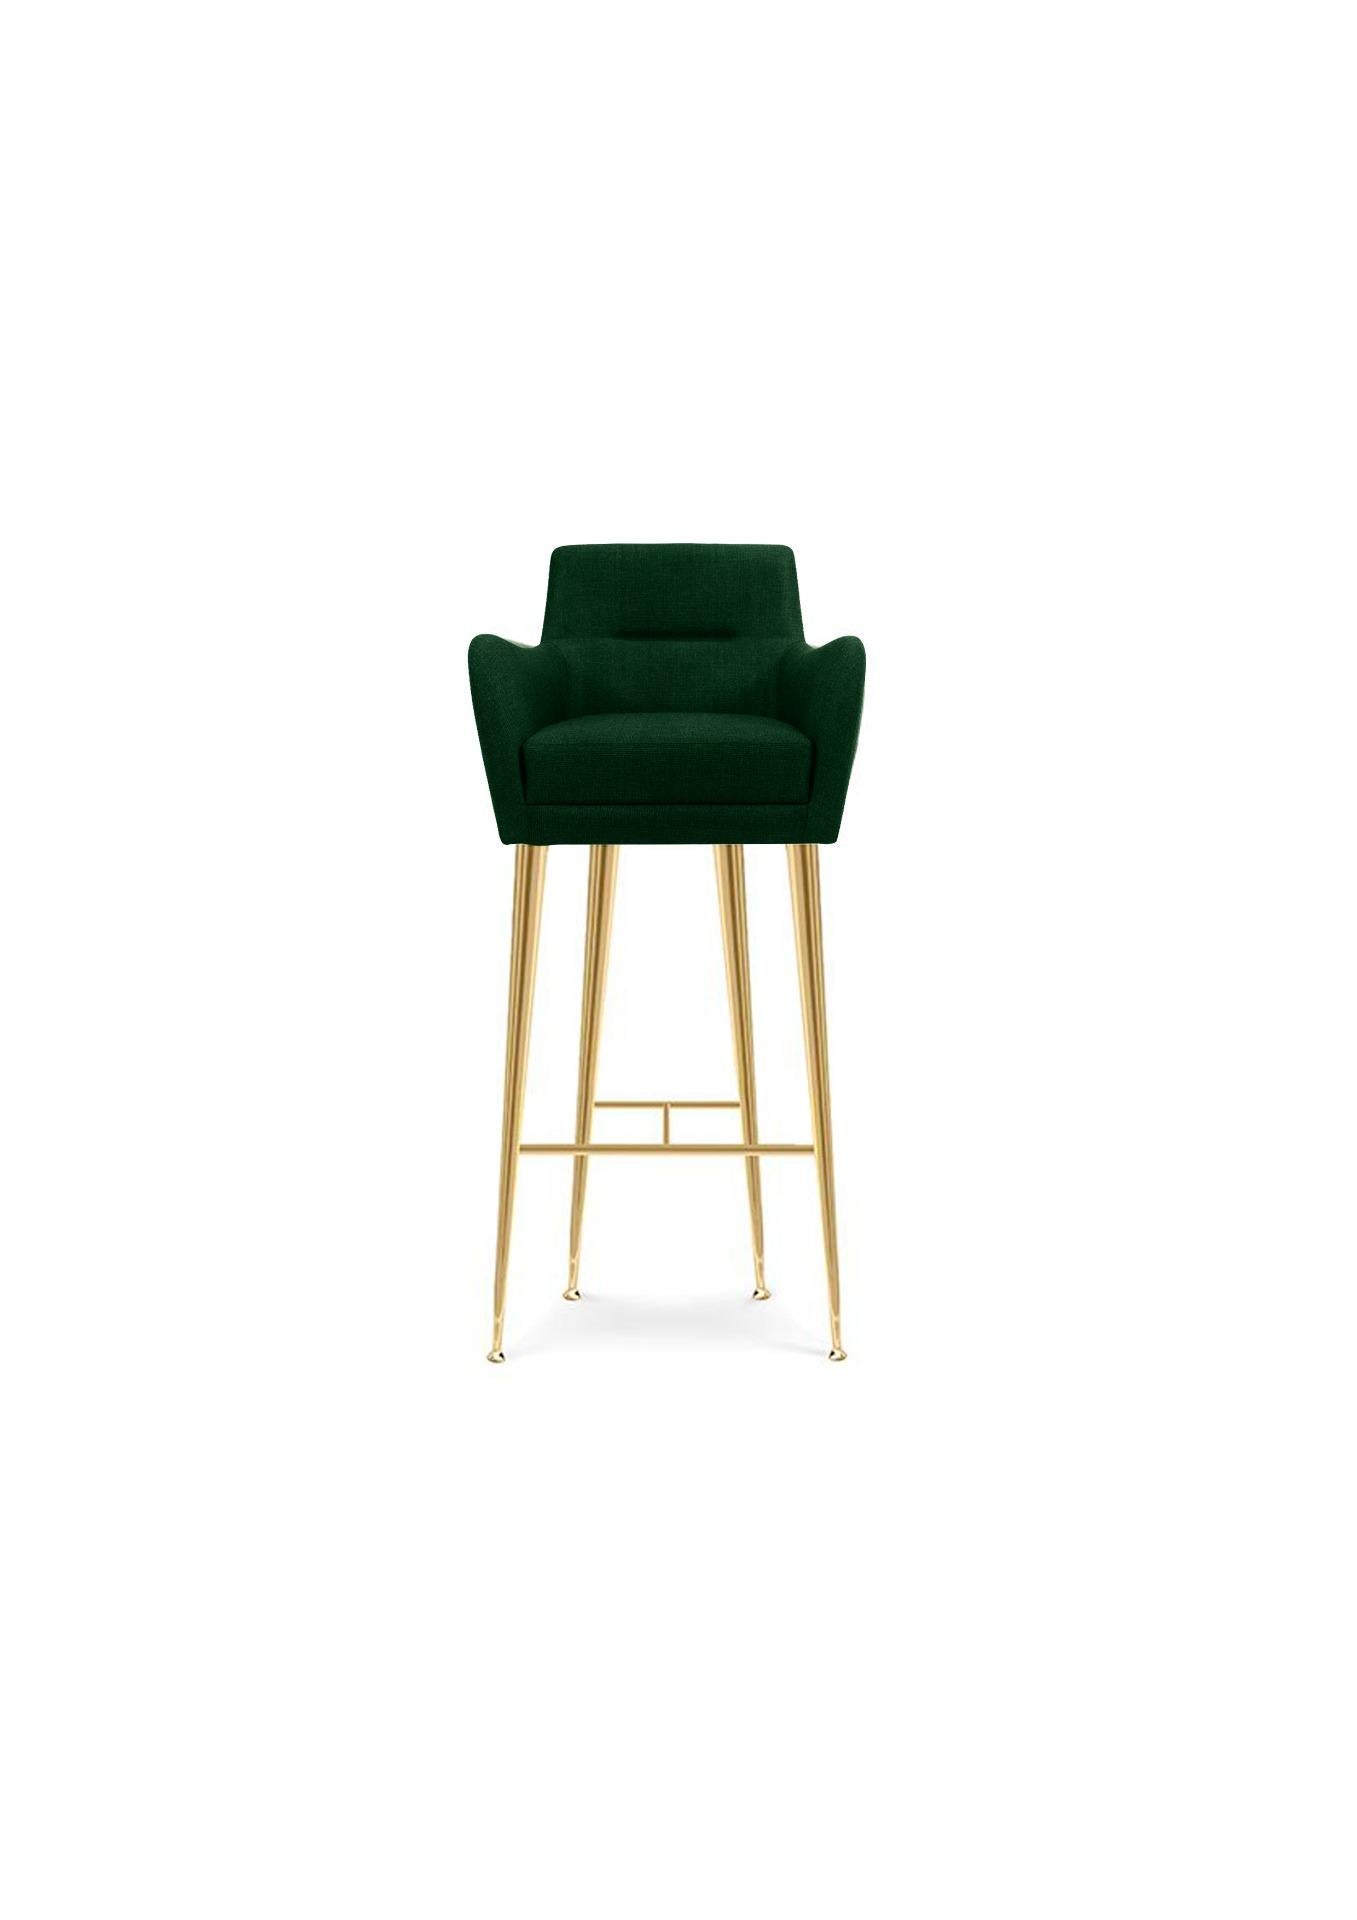 Dandridge bar chair is part of a bigger collection, matching an armchair and a sofa. It has a low back and accent sloping arms, that makes it more confortable than a counter stool. The long tapered polished brass legs give it a sensual and slim